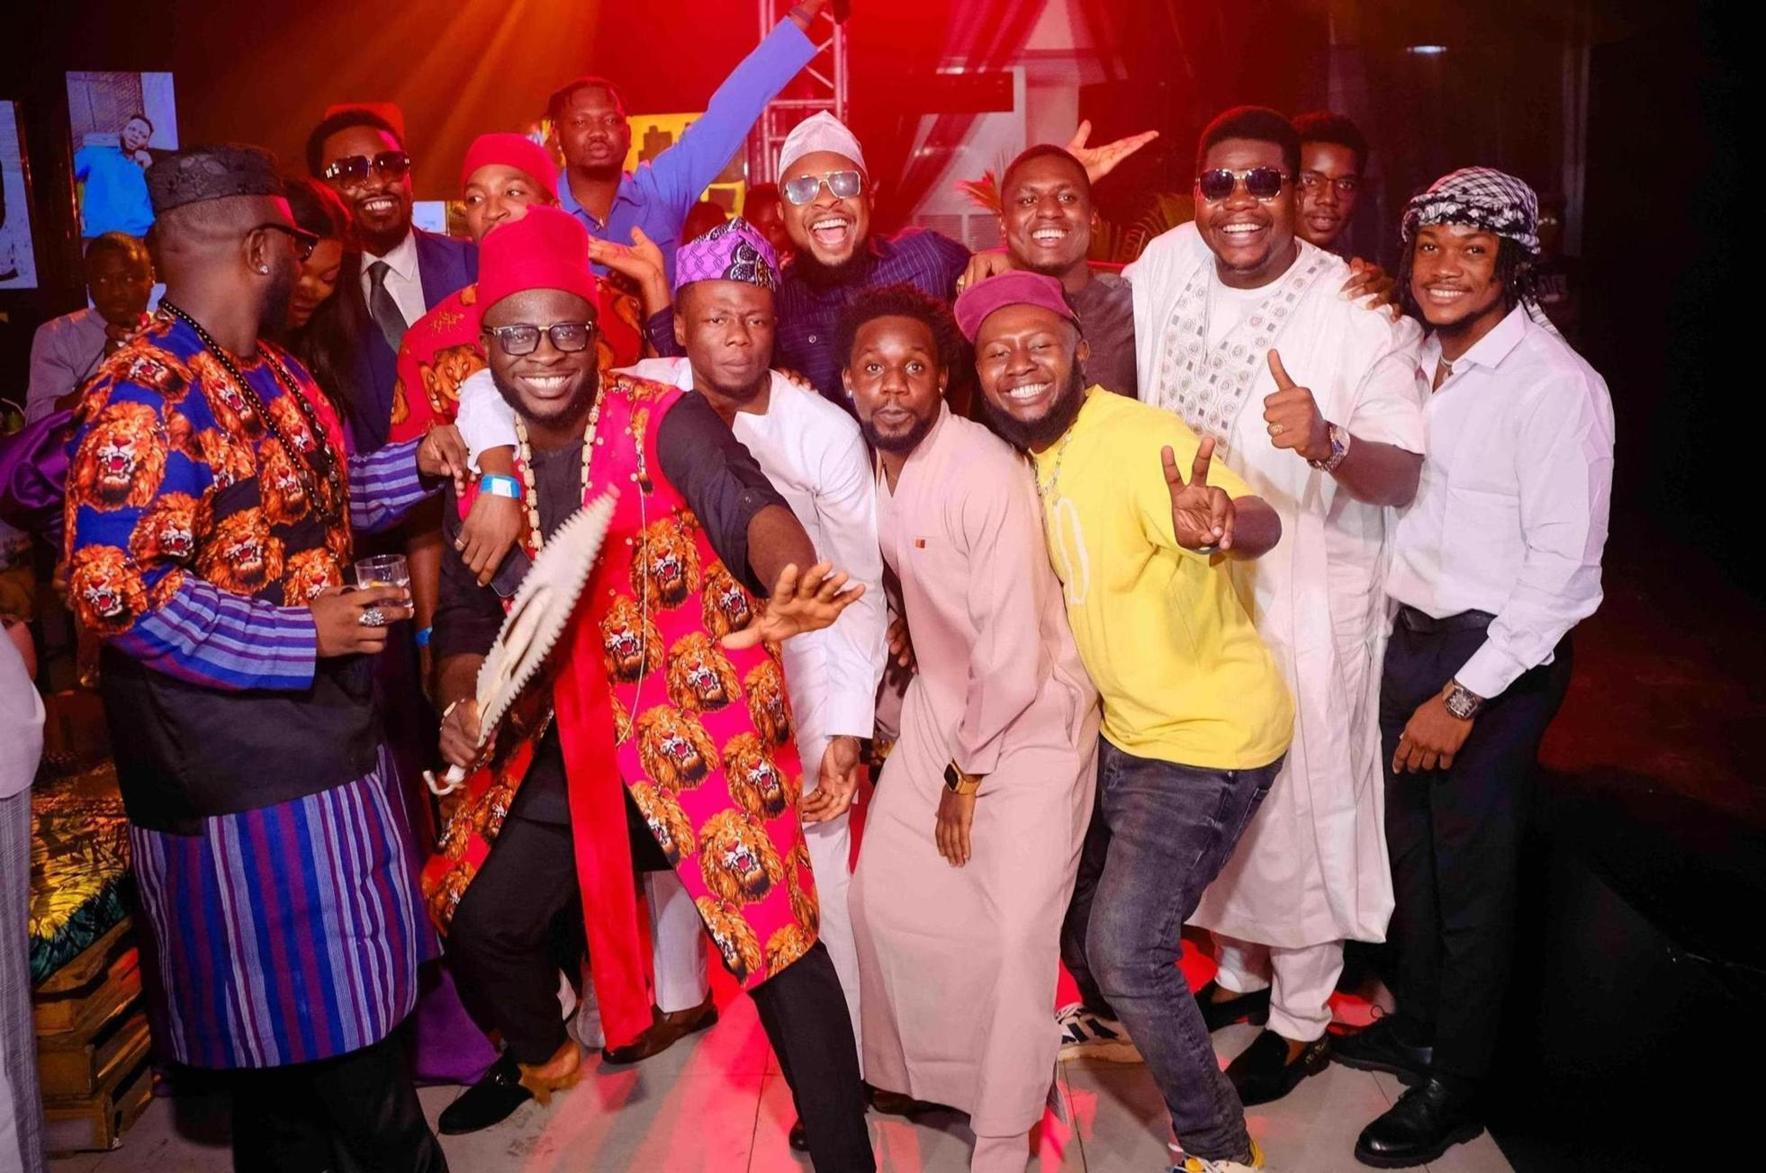 Scenes from YouTube’s Africa Day celebration with Nollywood stars and content creators in Lagos